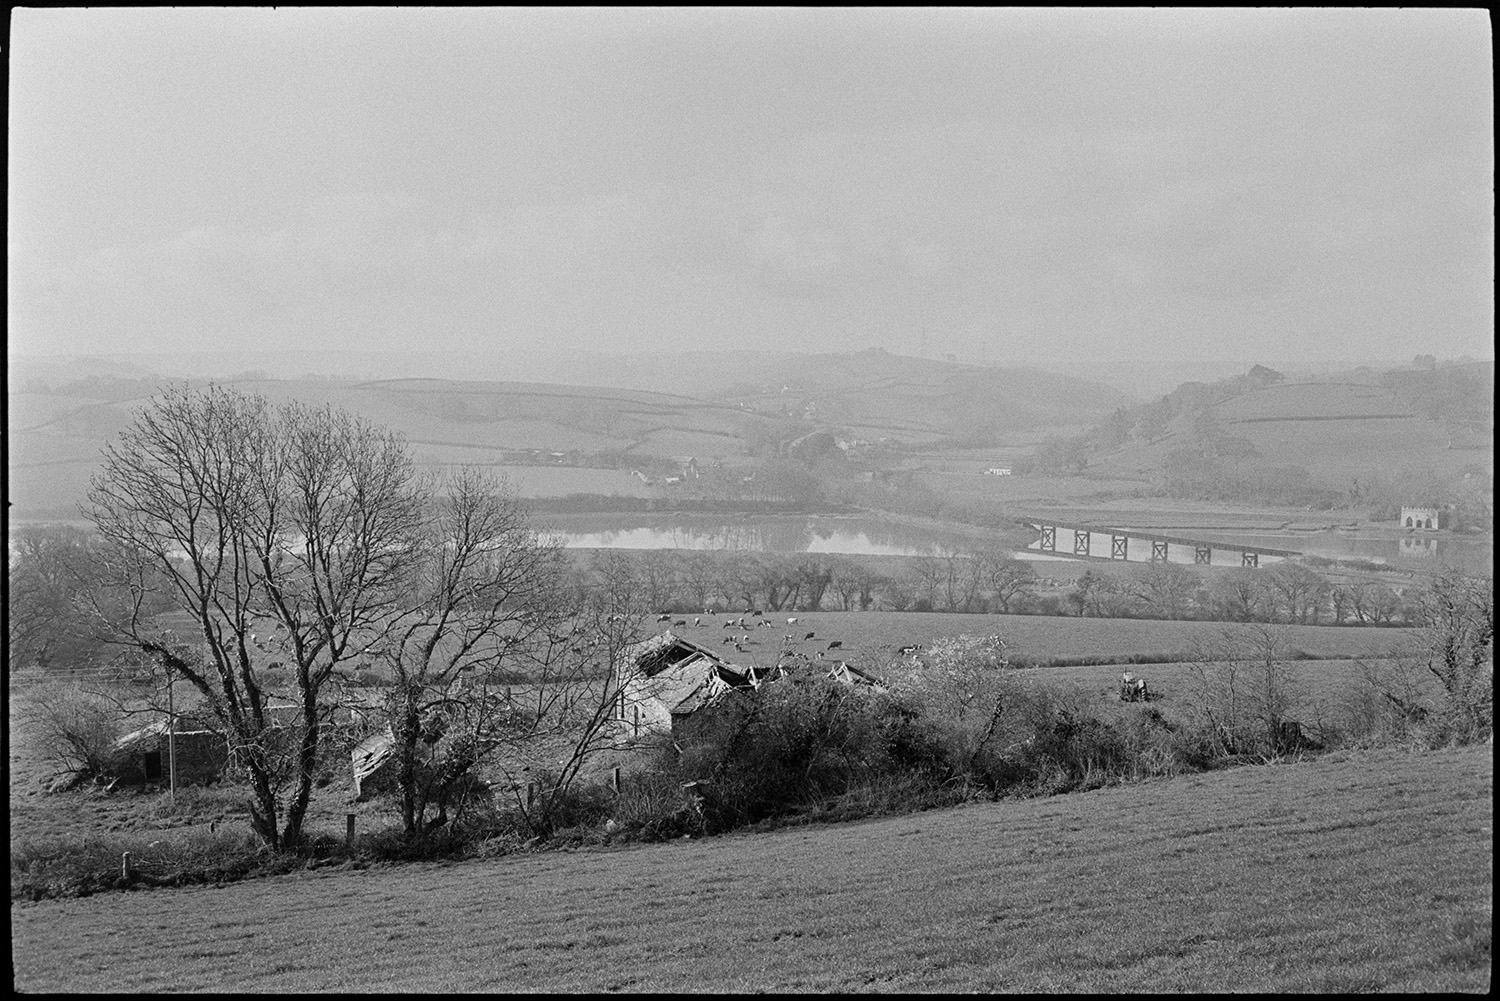 Cattle in mist, clearing. 
[Cattle grazing in a field with barns at Tennacott, Bideford. The railway bridge across the River Torridge at Pillmouth, Landcross can be seen in the background.]